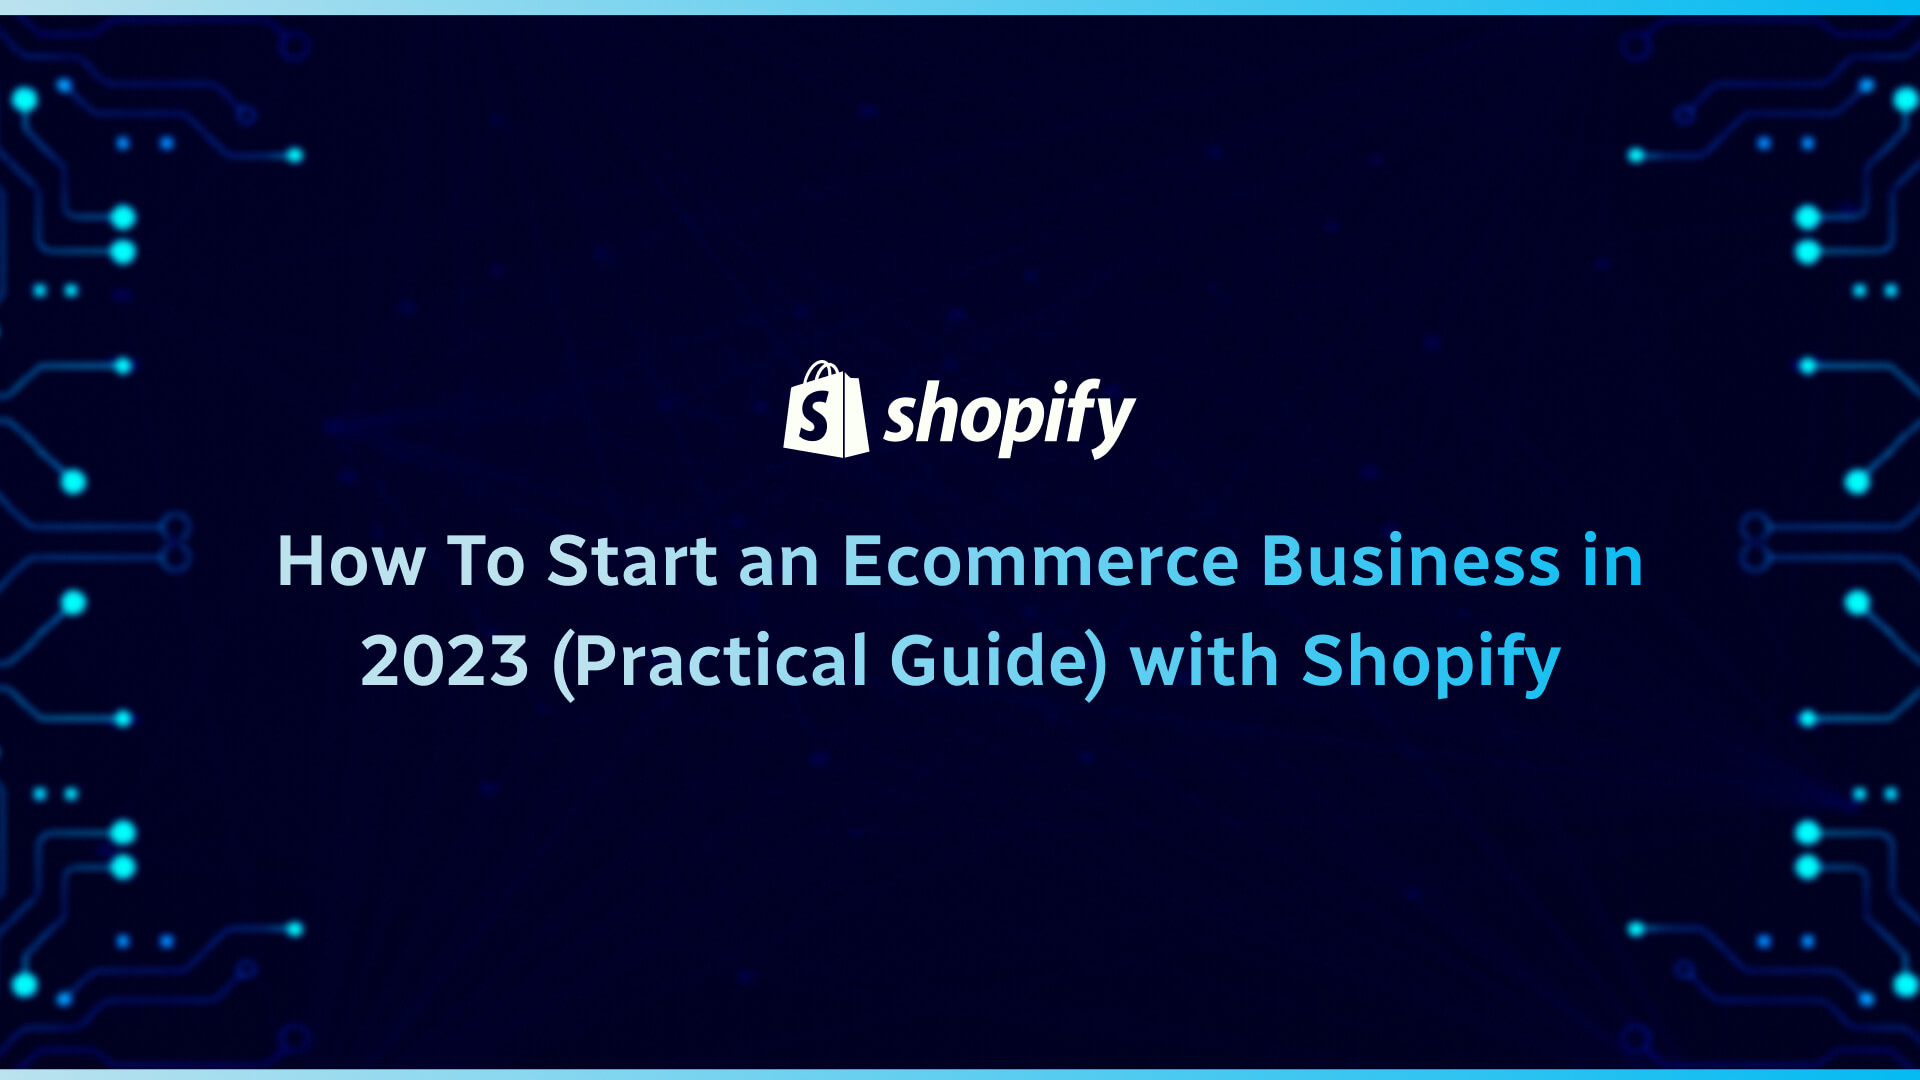 How To Start an Ecommerce Business in 2023 (Practical Guide) with Shopify